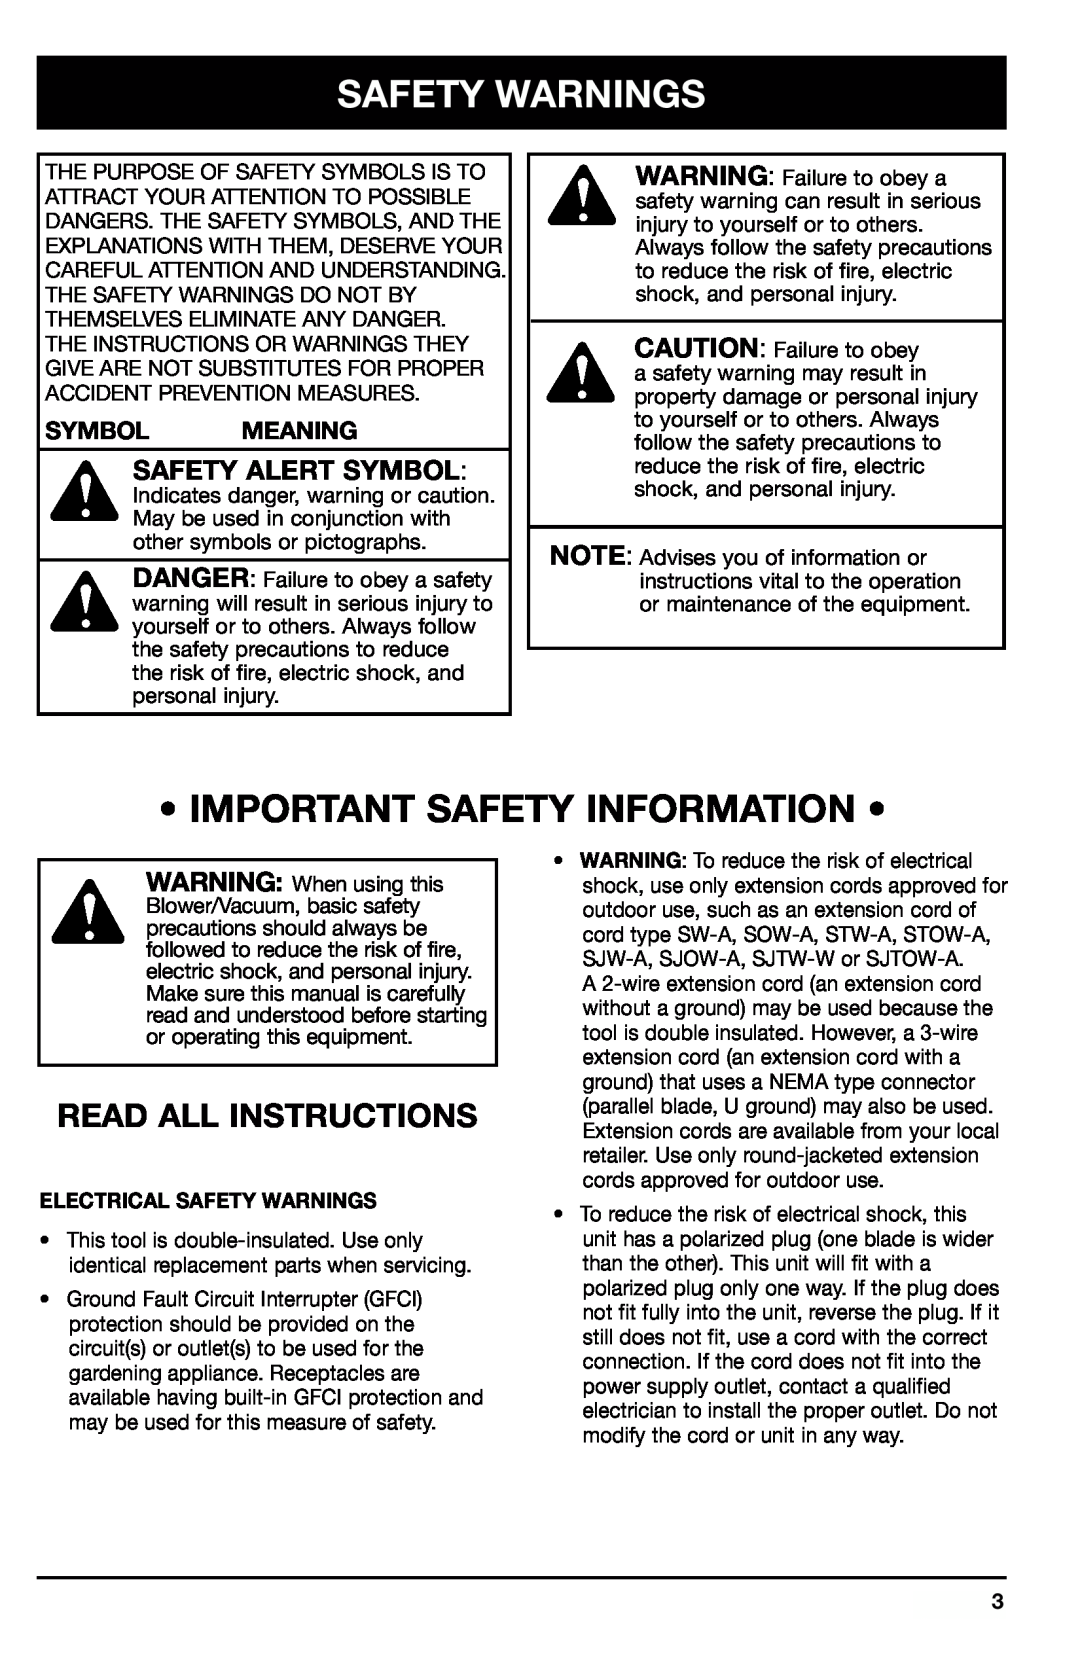 Ryobi 180r, 190r Safety Warnings, Read All Instructions, Safety Alert Symbol, Symbol Meaning, Important Safety Information 